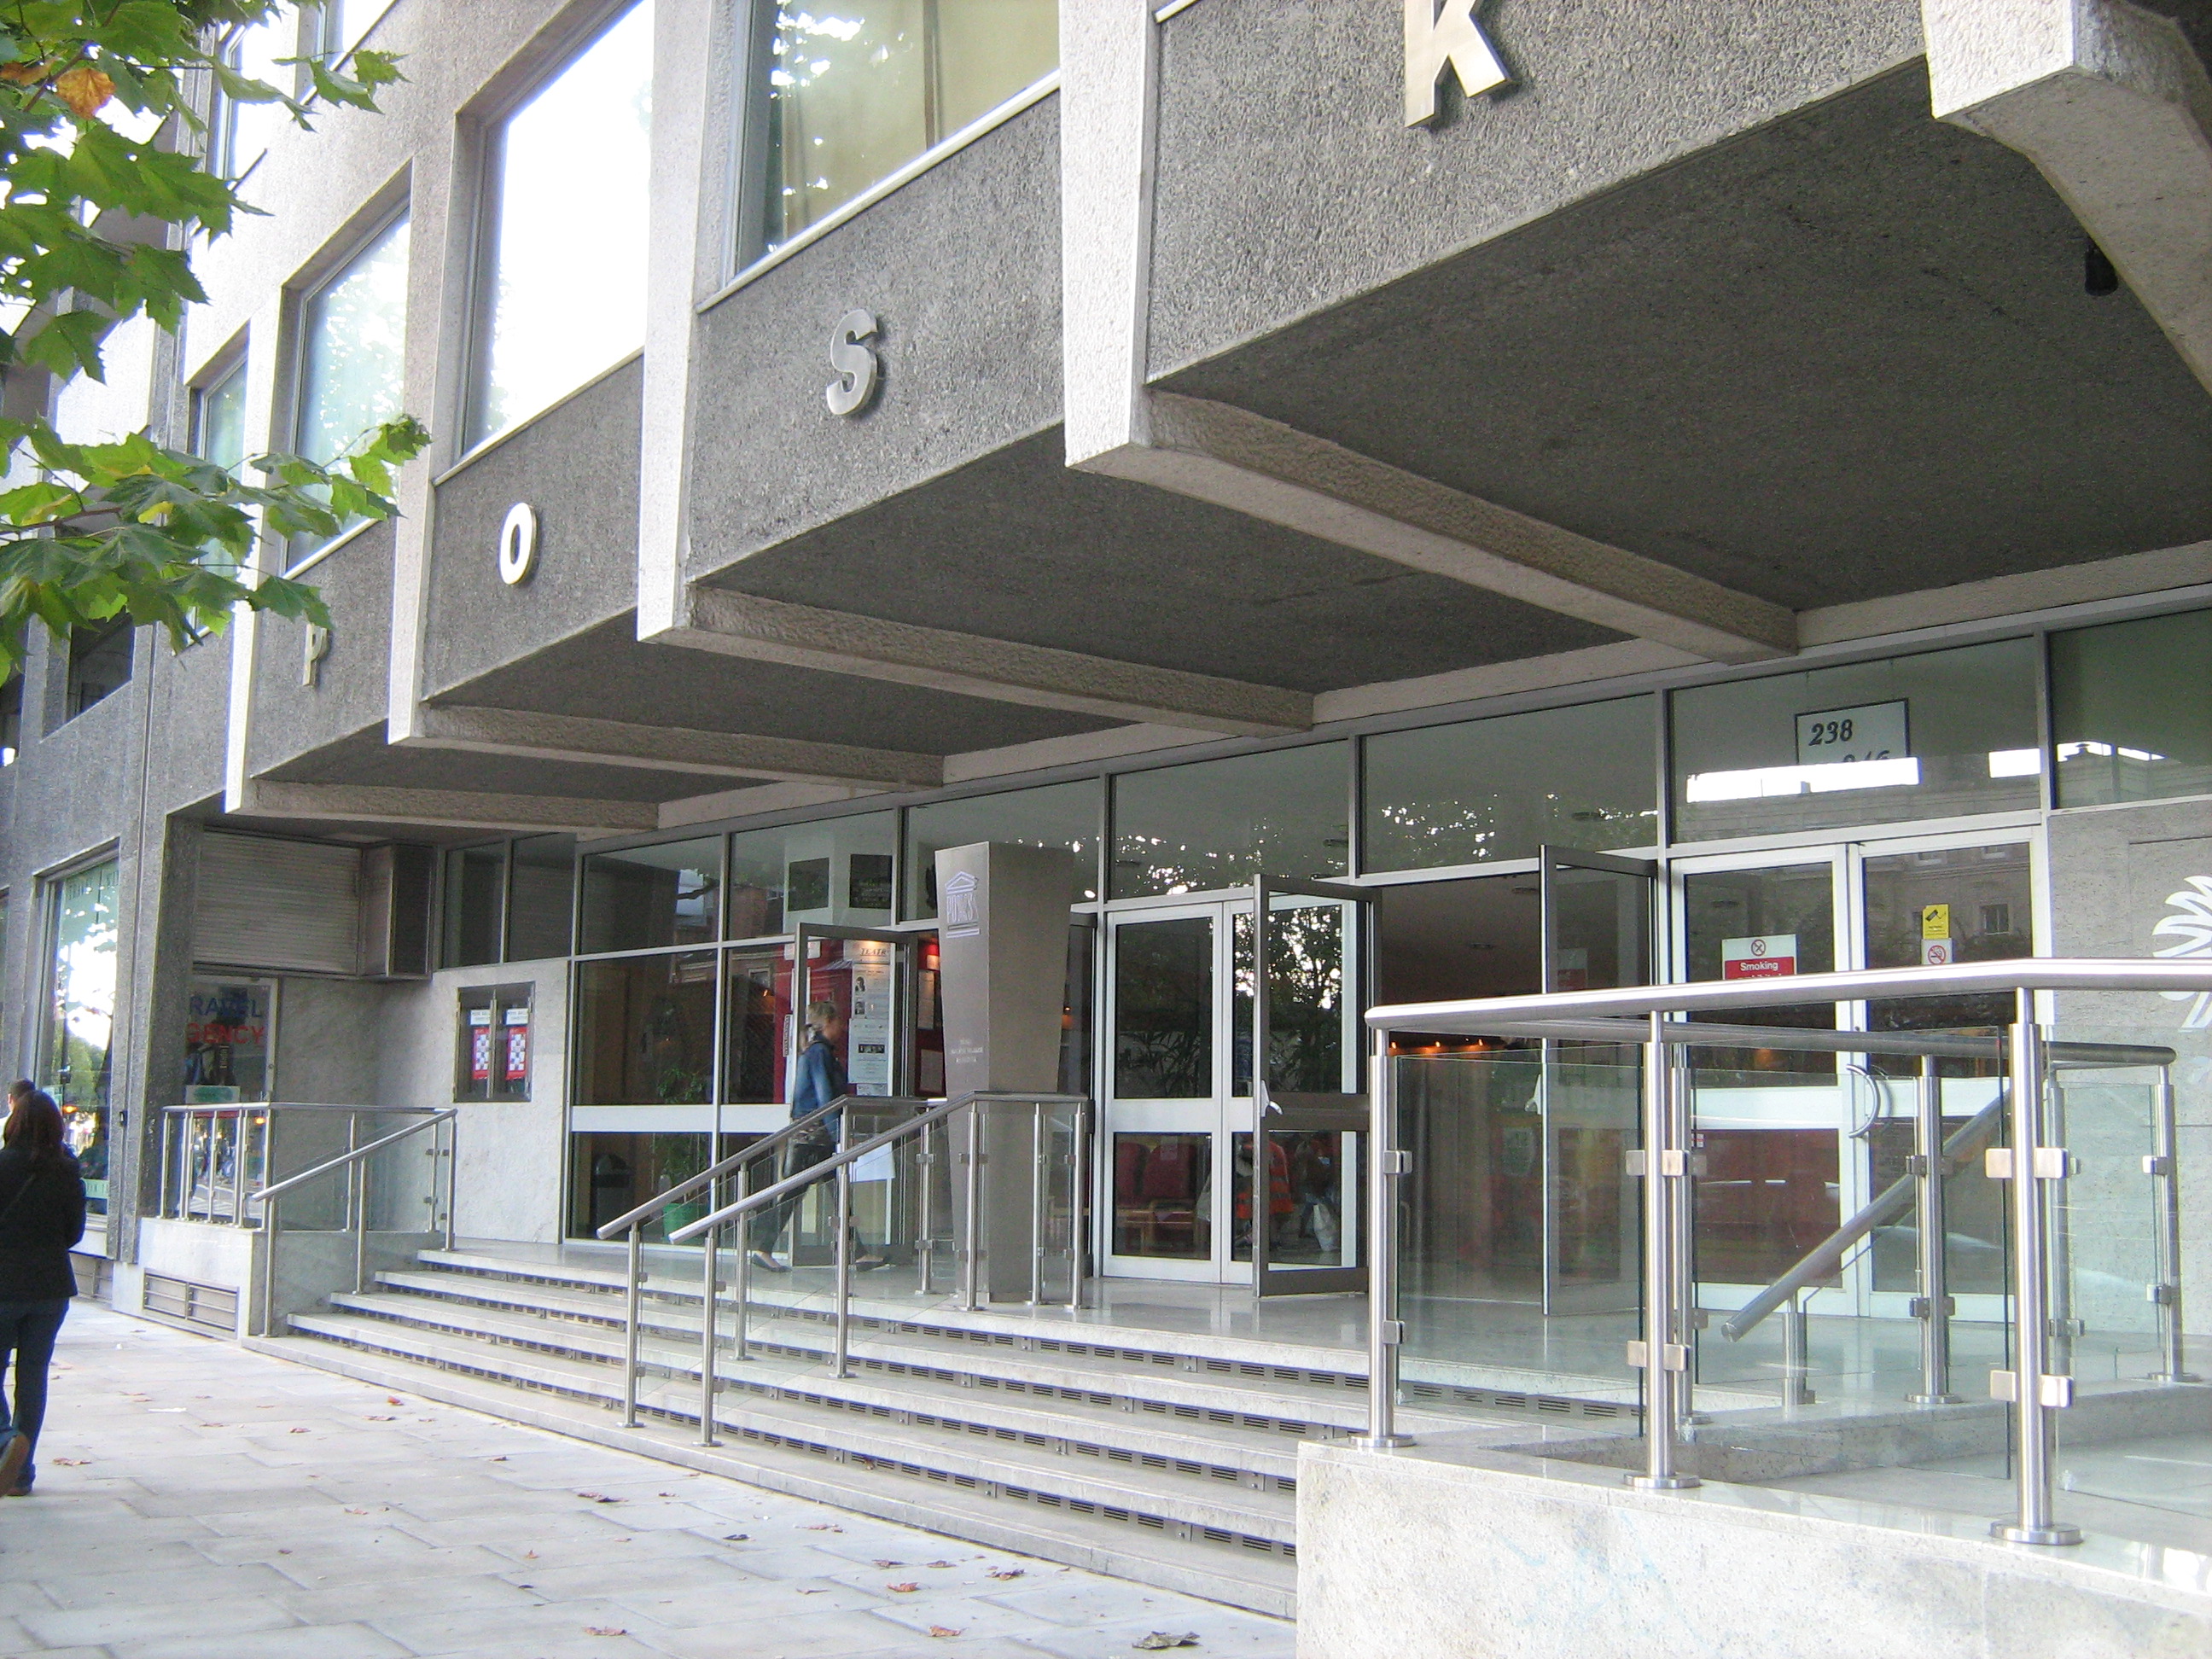 Entrance to the POSK building in London